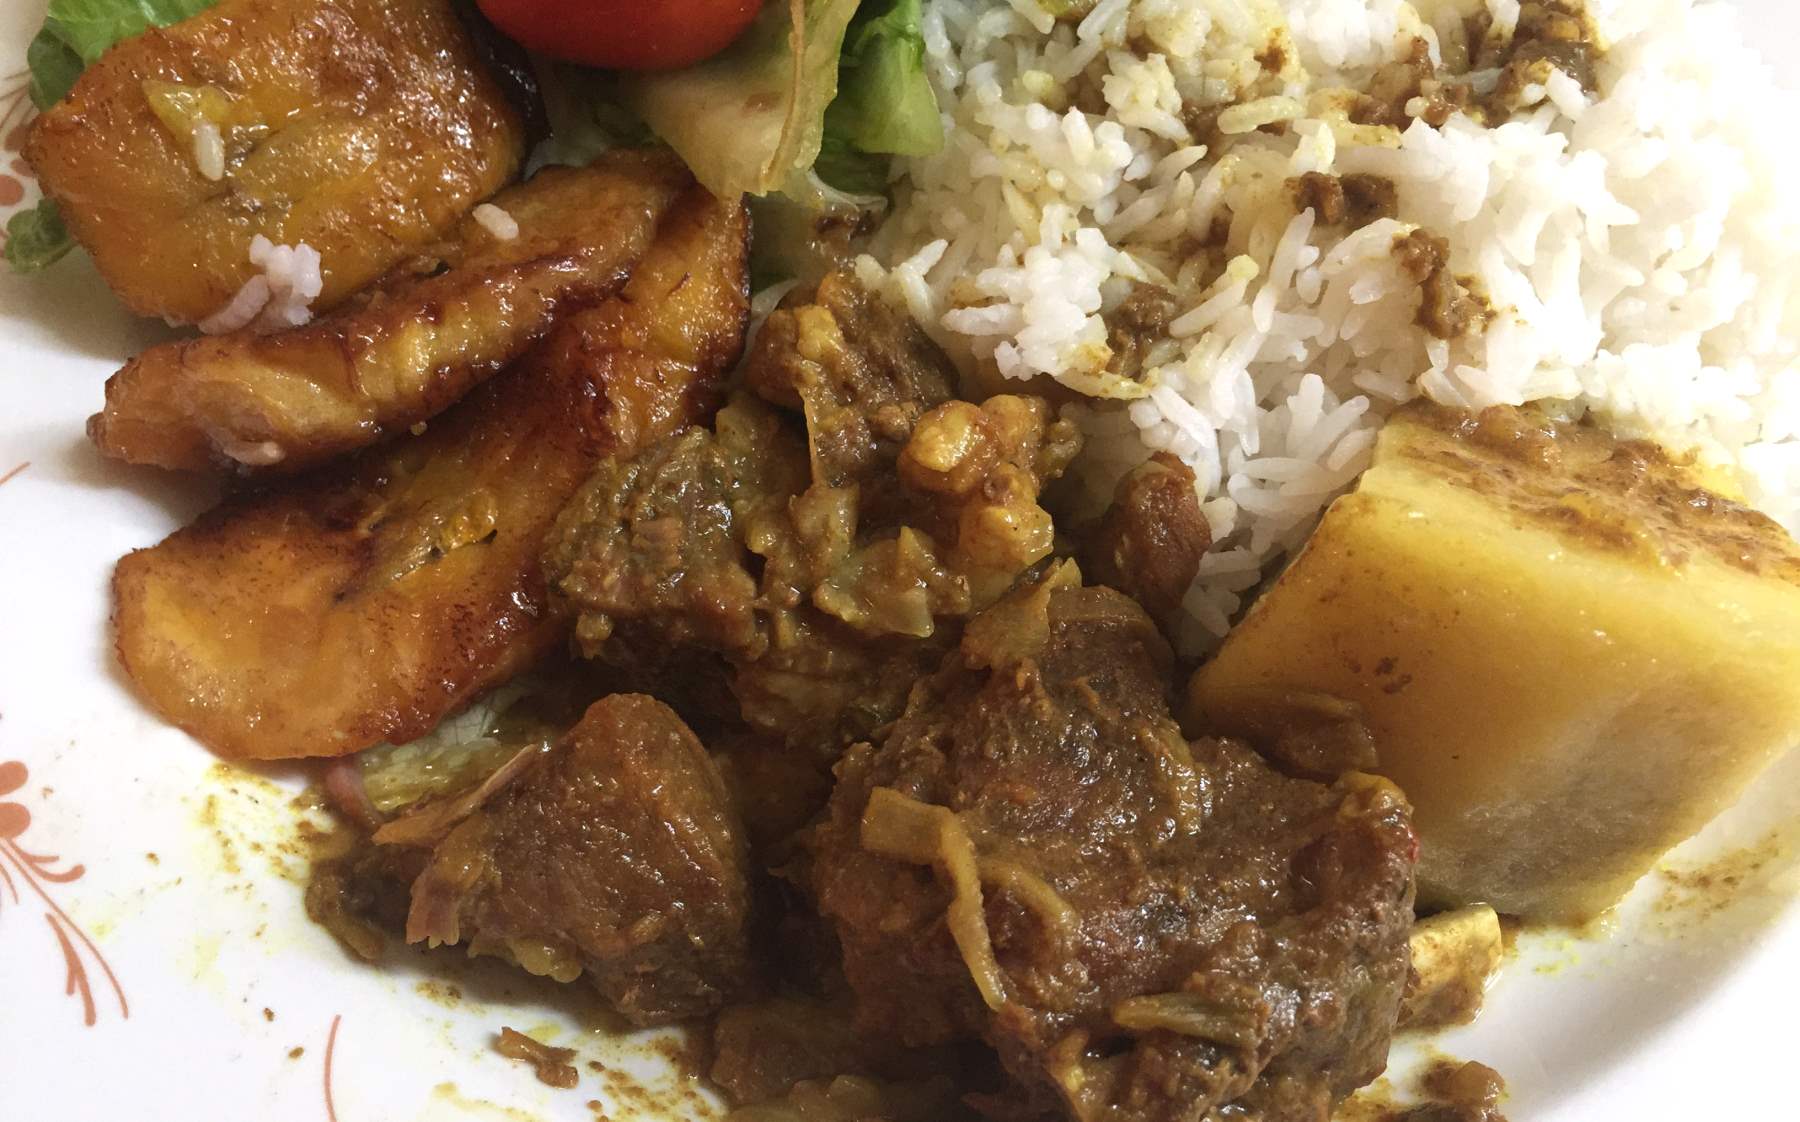 Canadian Broadcasting Corp Features Jamaican Food for Black History Month